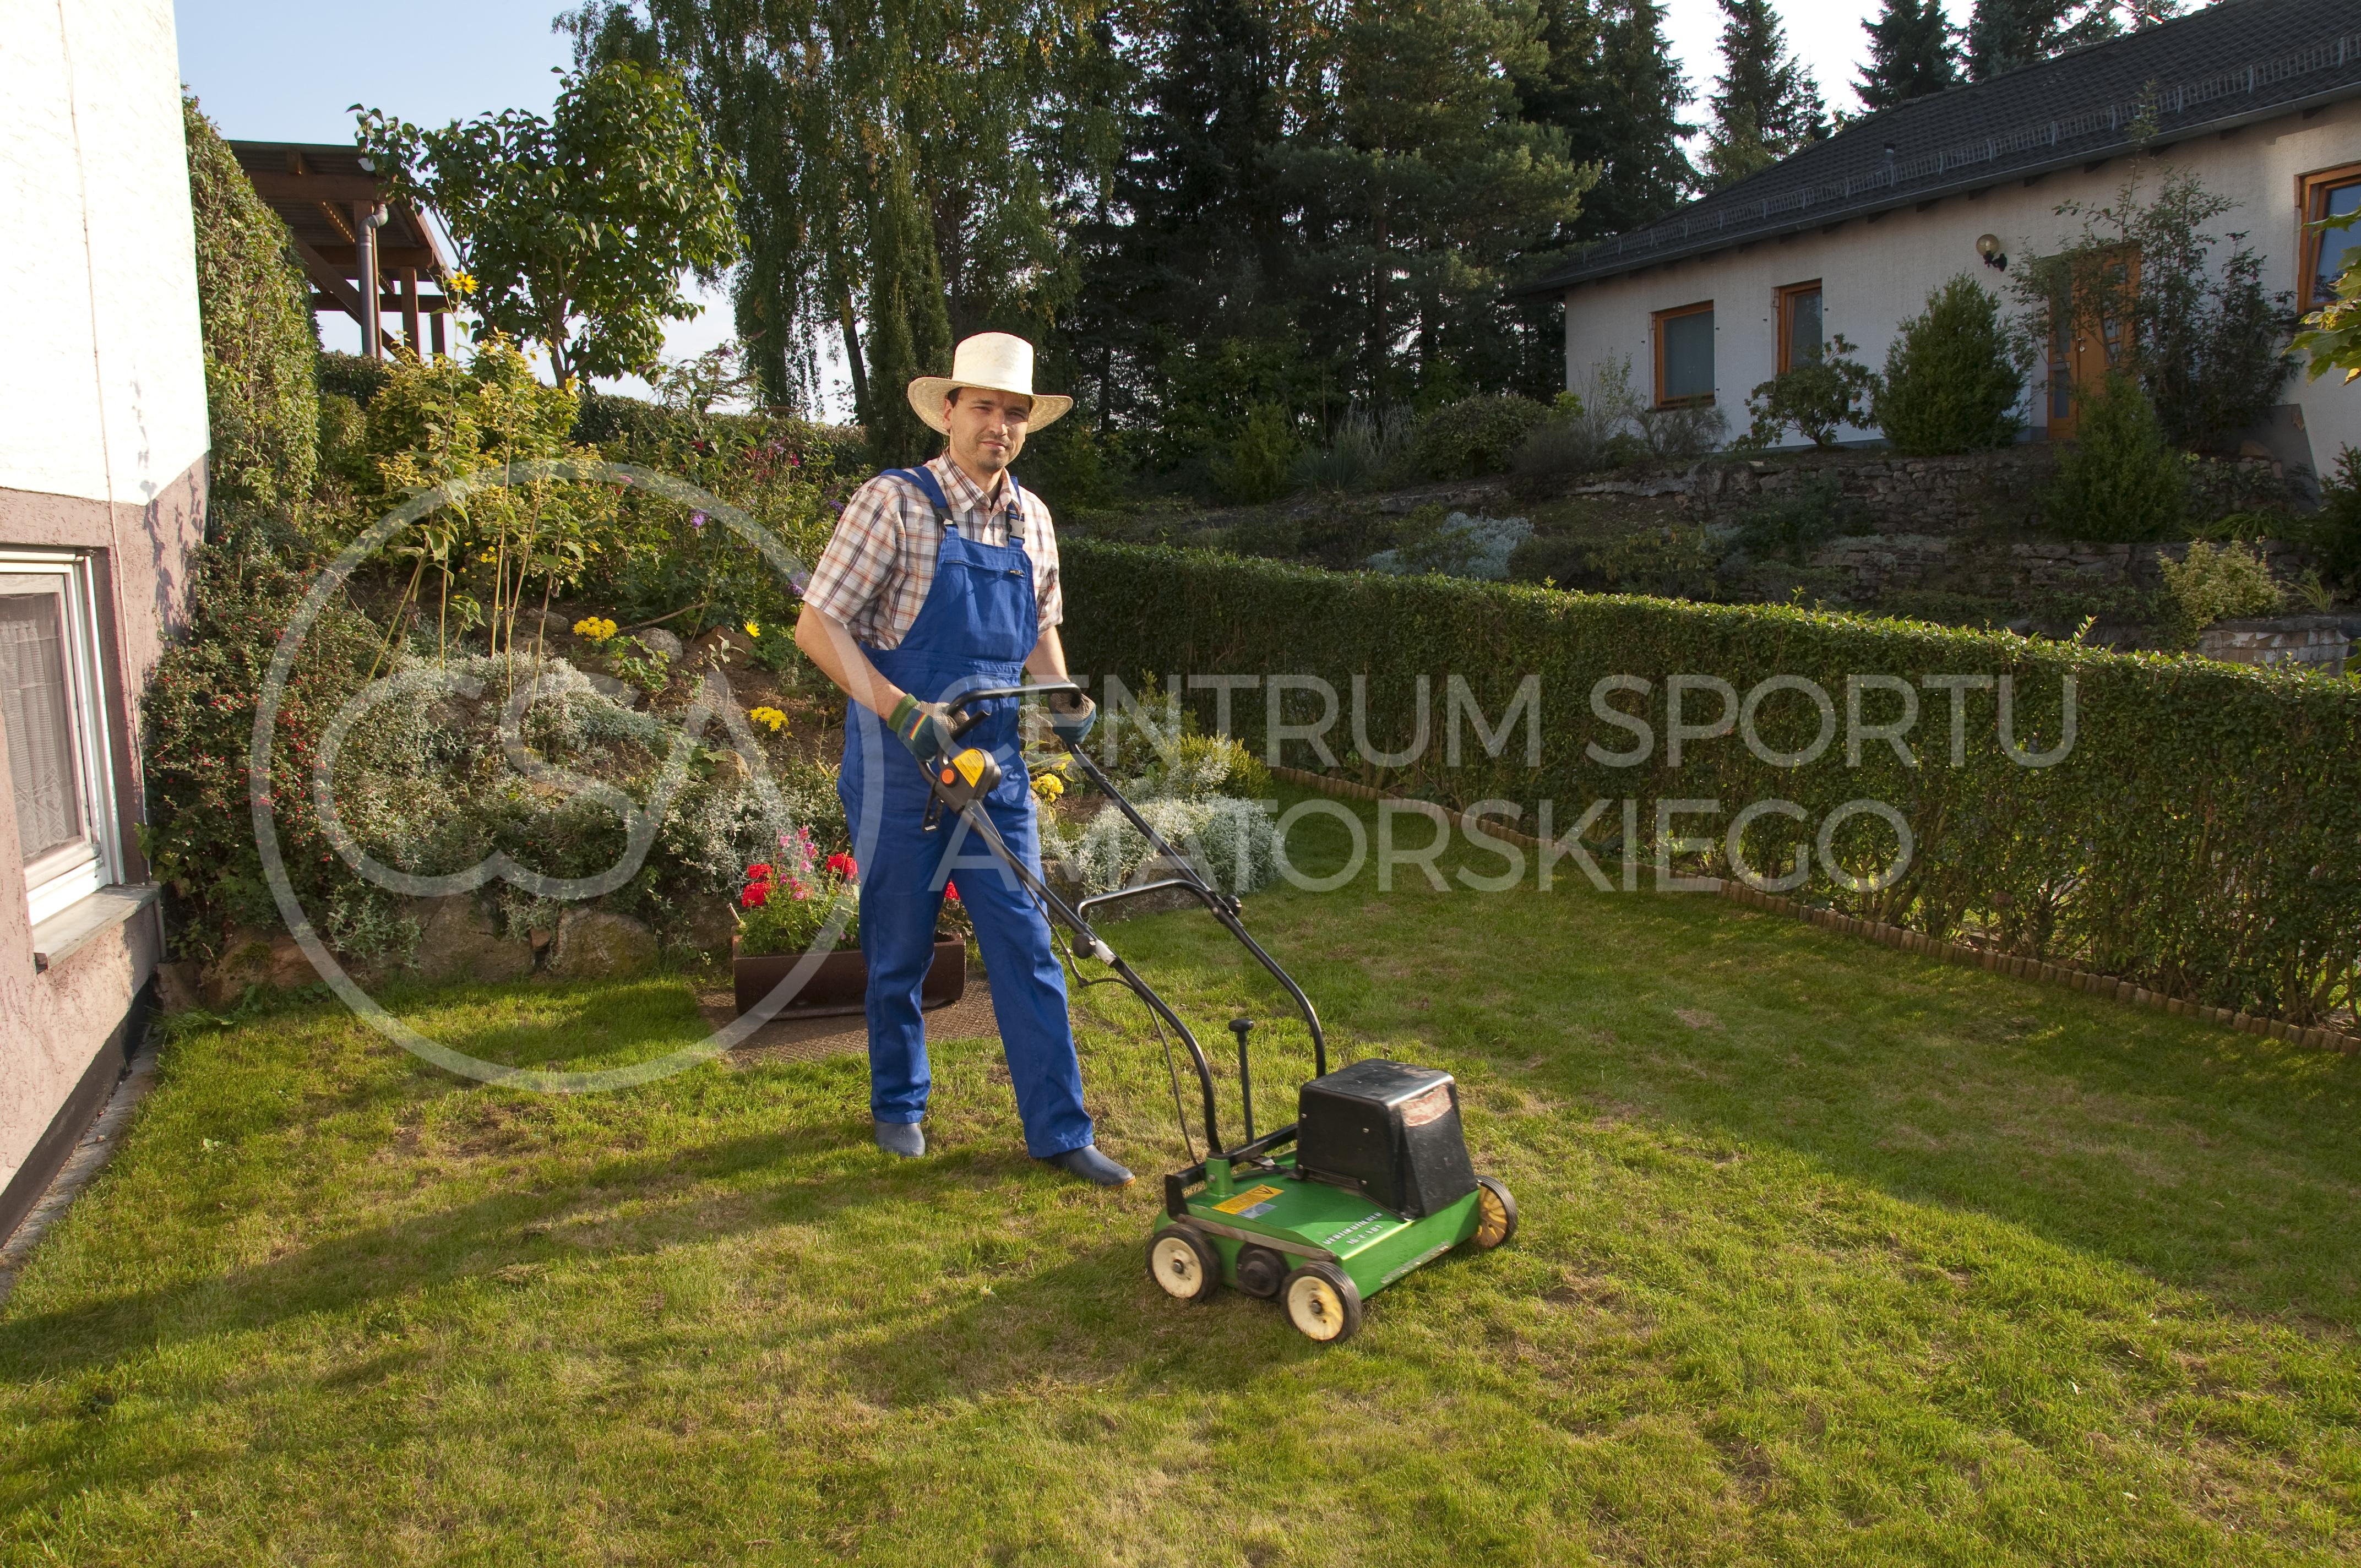 Man with blue overalls and a plaid shirt and straw hat standing in the garden and maintains the lawn with an electric scarifier.